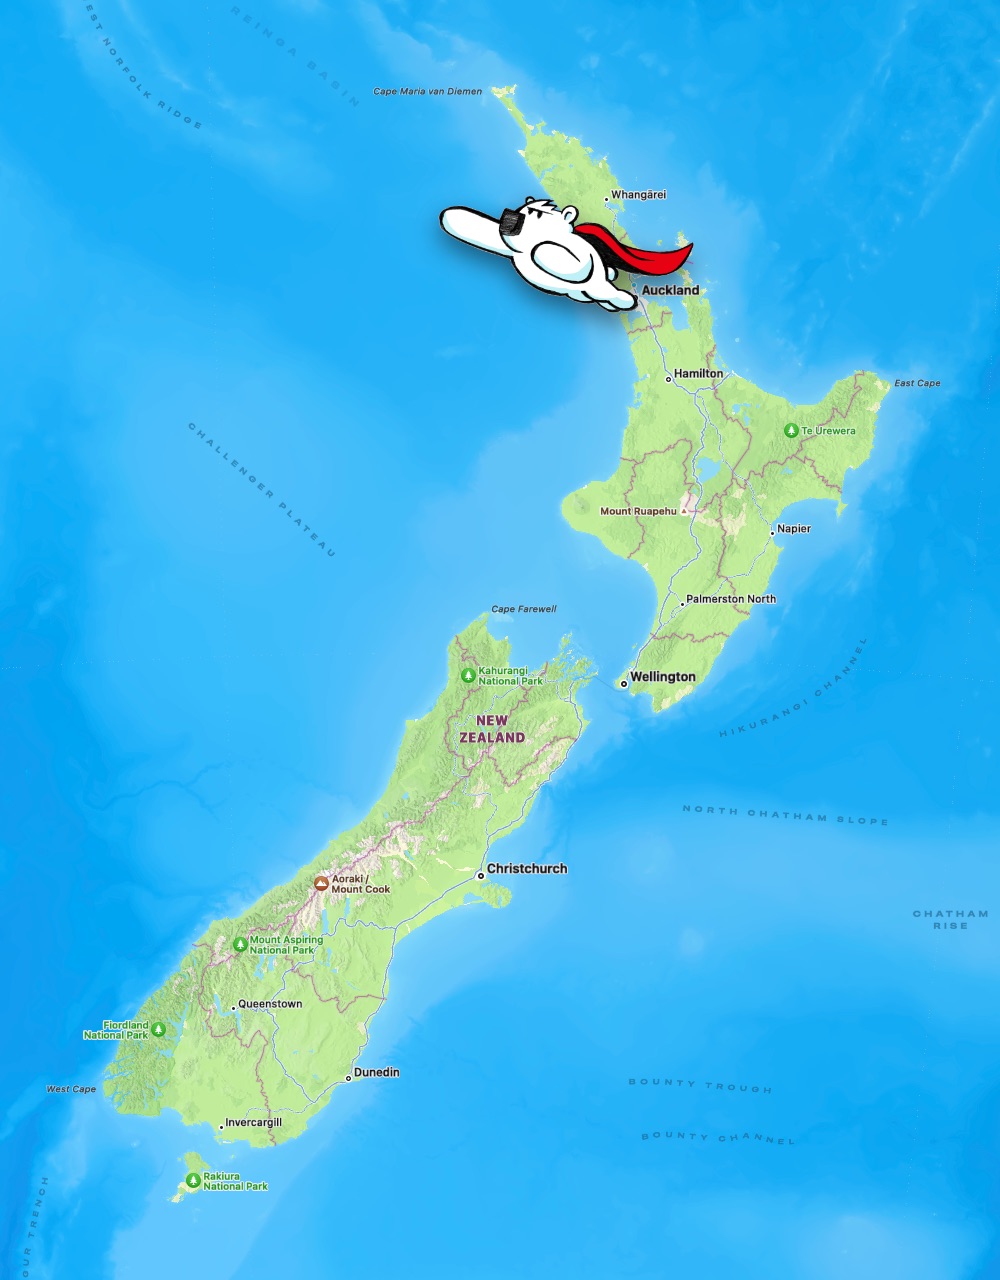 Map of New Zealand showing the location of Auckland